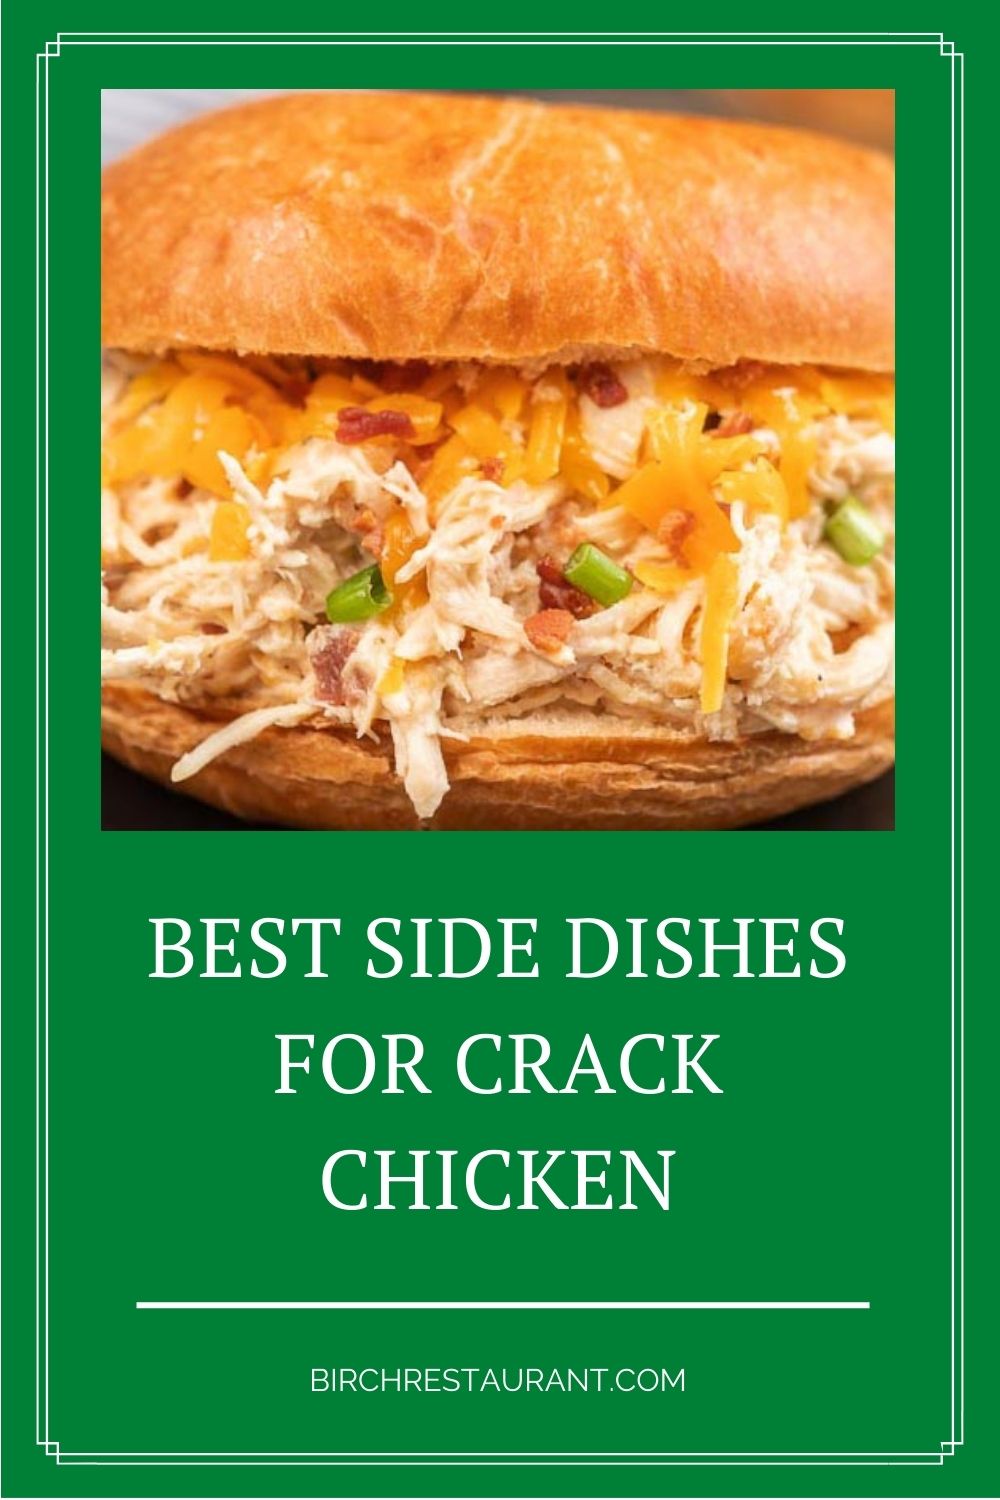 Best Side Dishes for Crack Chicken